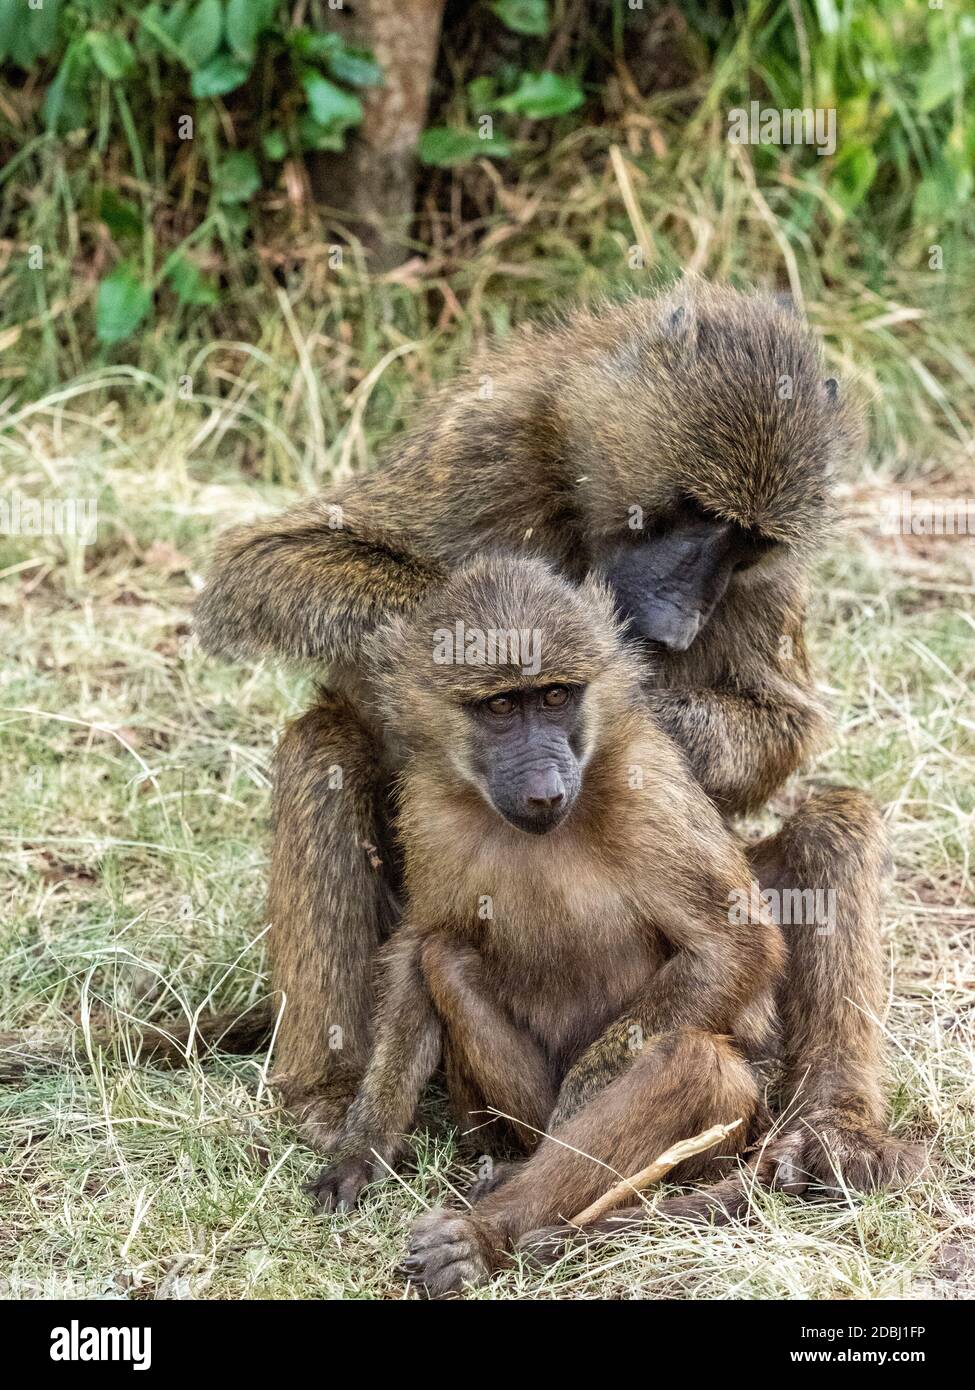 Olive baboons (Papio anubis) grooming each other in Ngorongoro Conservation Area, Tanzania, East Africa, Africa Stock Photo